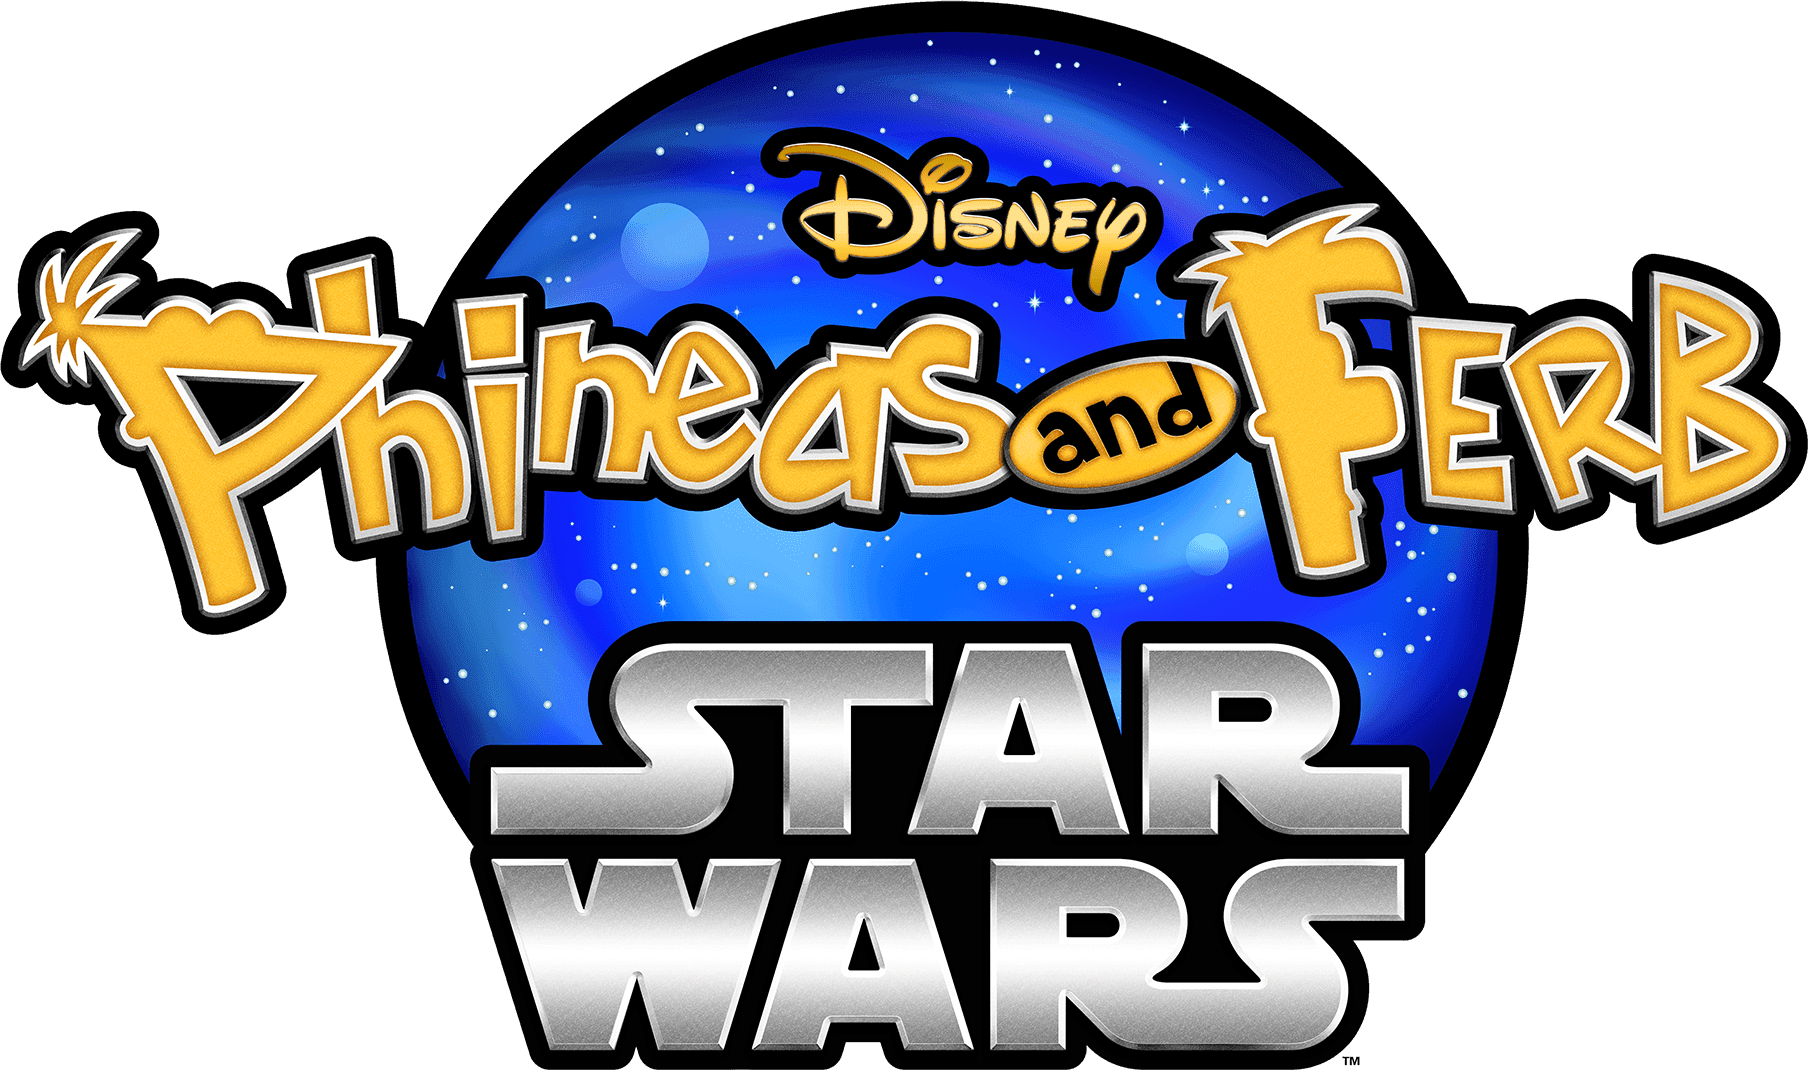 Phineas and Ferb: Star Wars logo